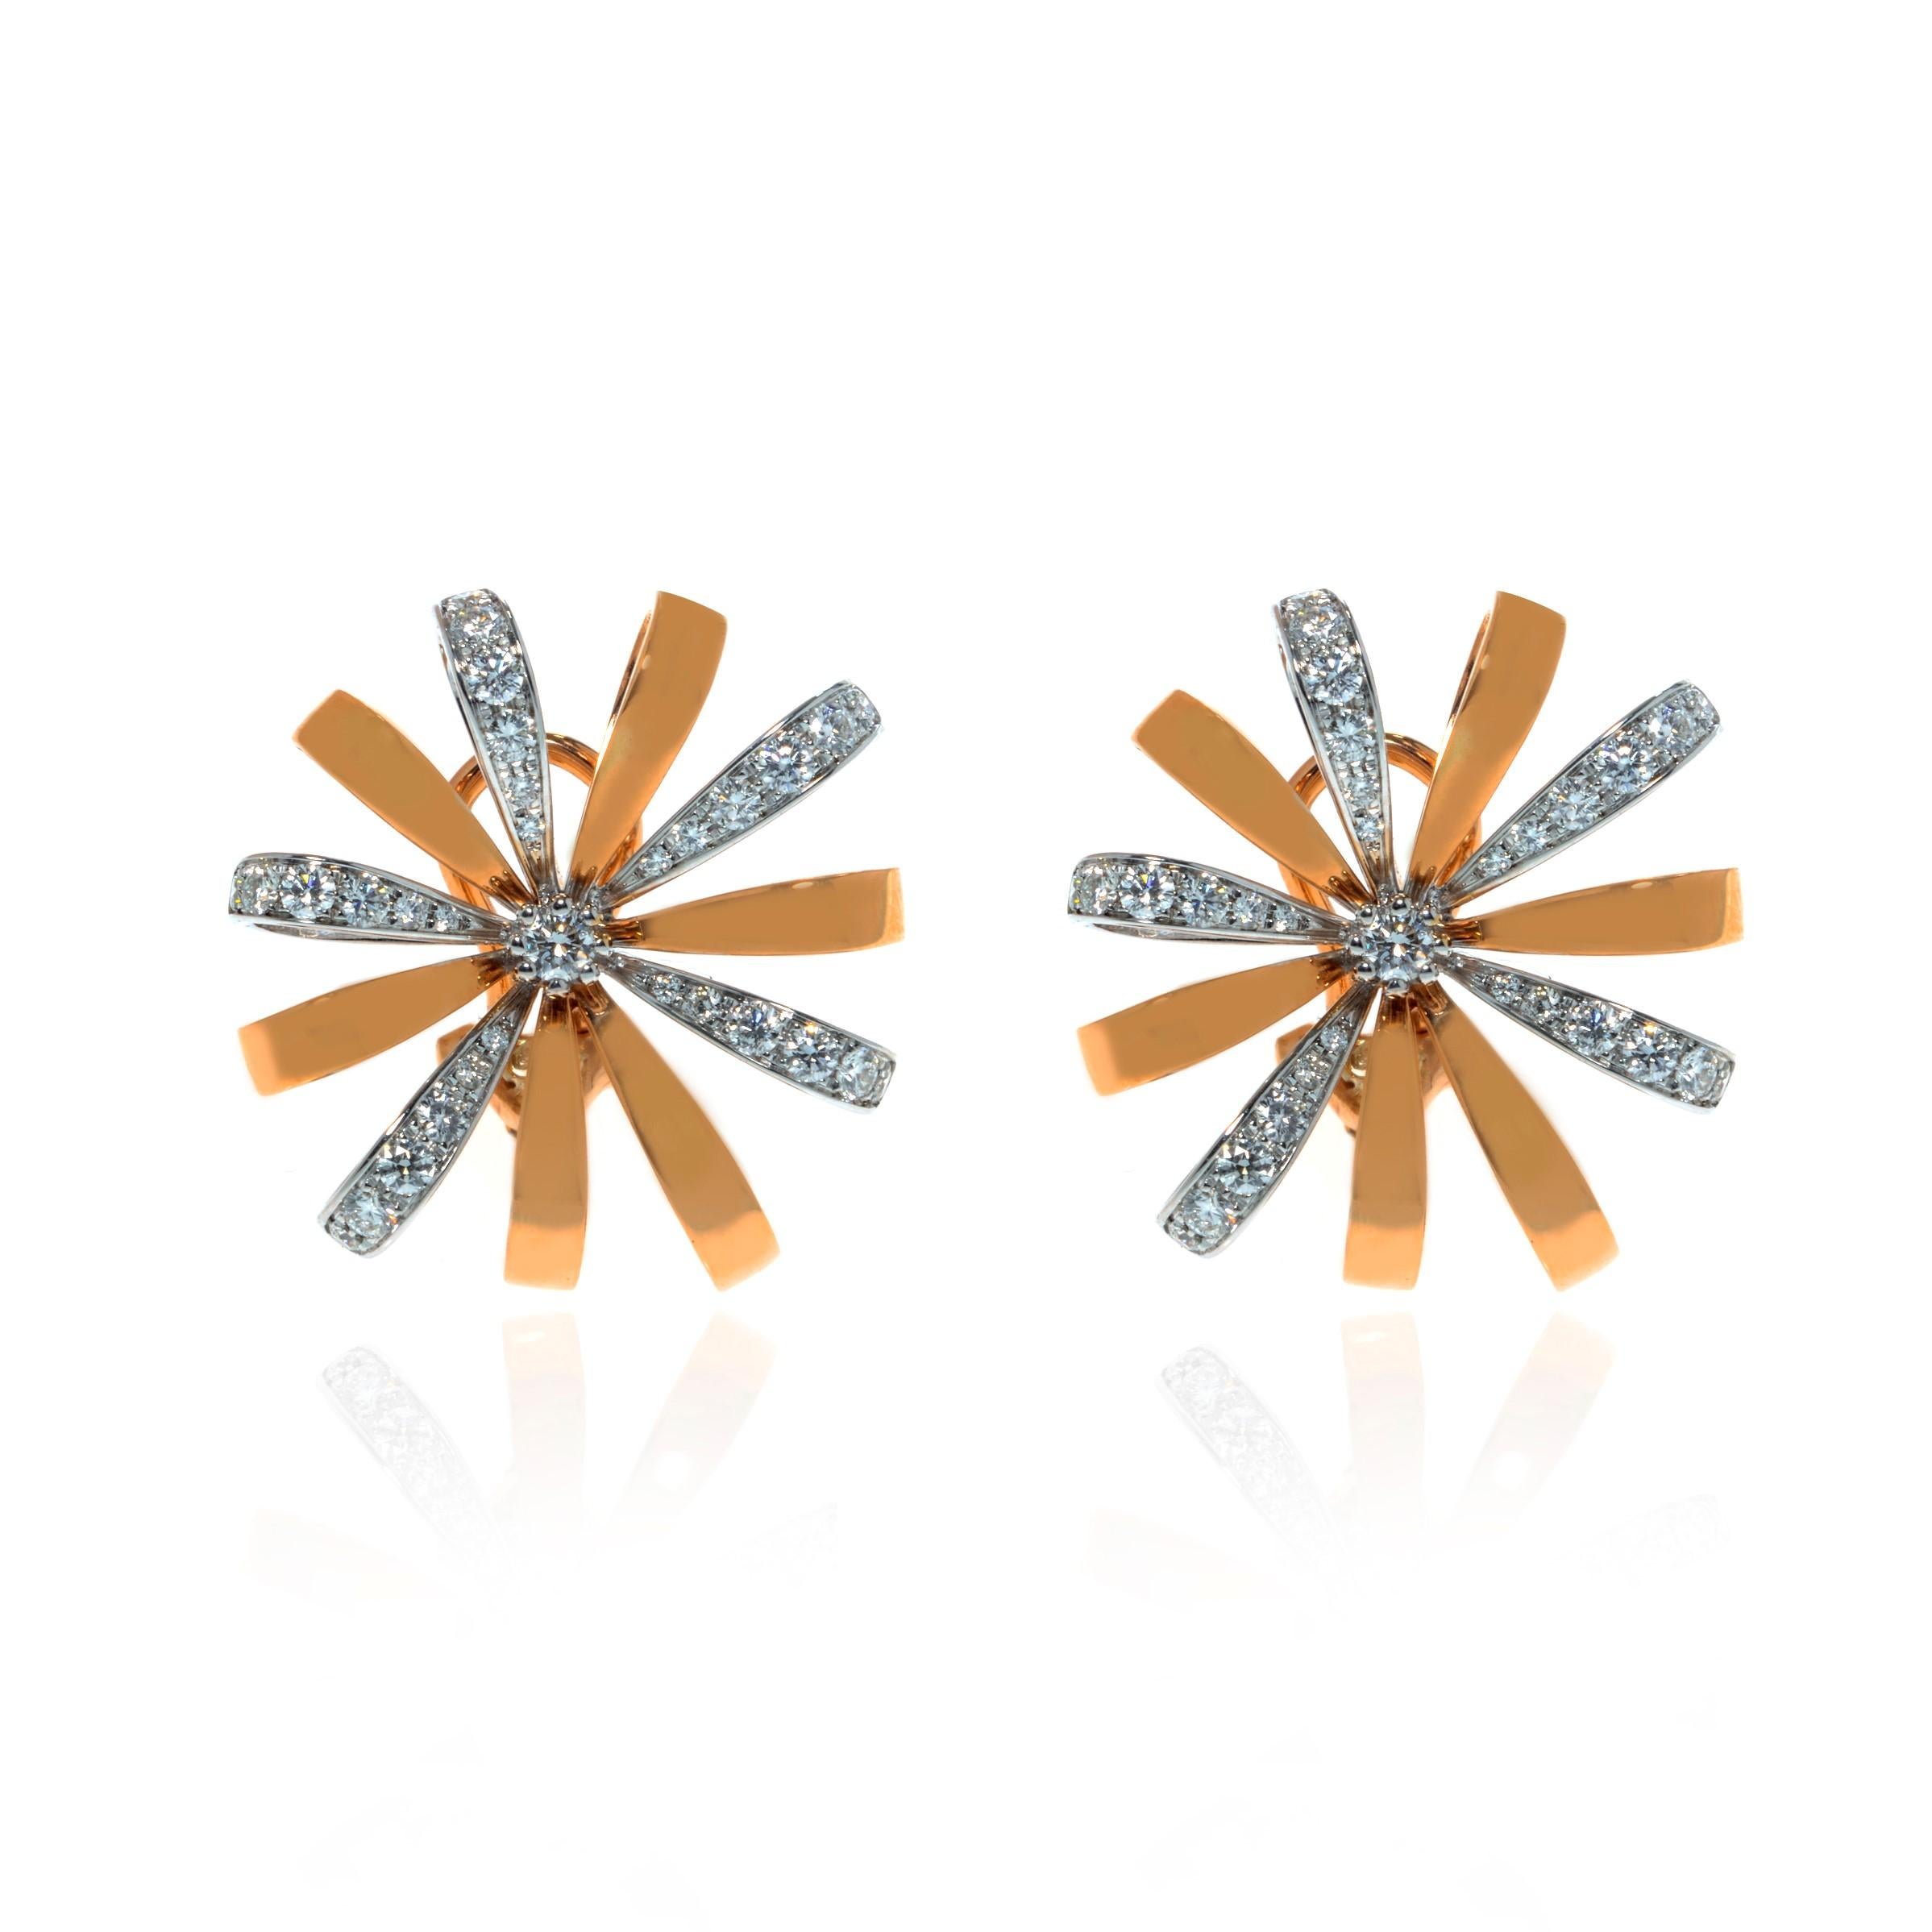 This gorgeous pair of estate earrings is finely crafted in solid 18K rose and white gold, made in the shape of beautiful flowers. The total diamond weight for the pair is 1.31 carats of VVS clarity and G color. Each earring measures 26mm. The